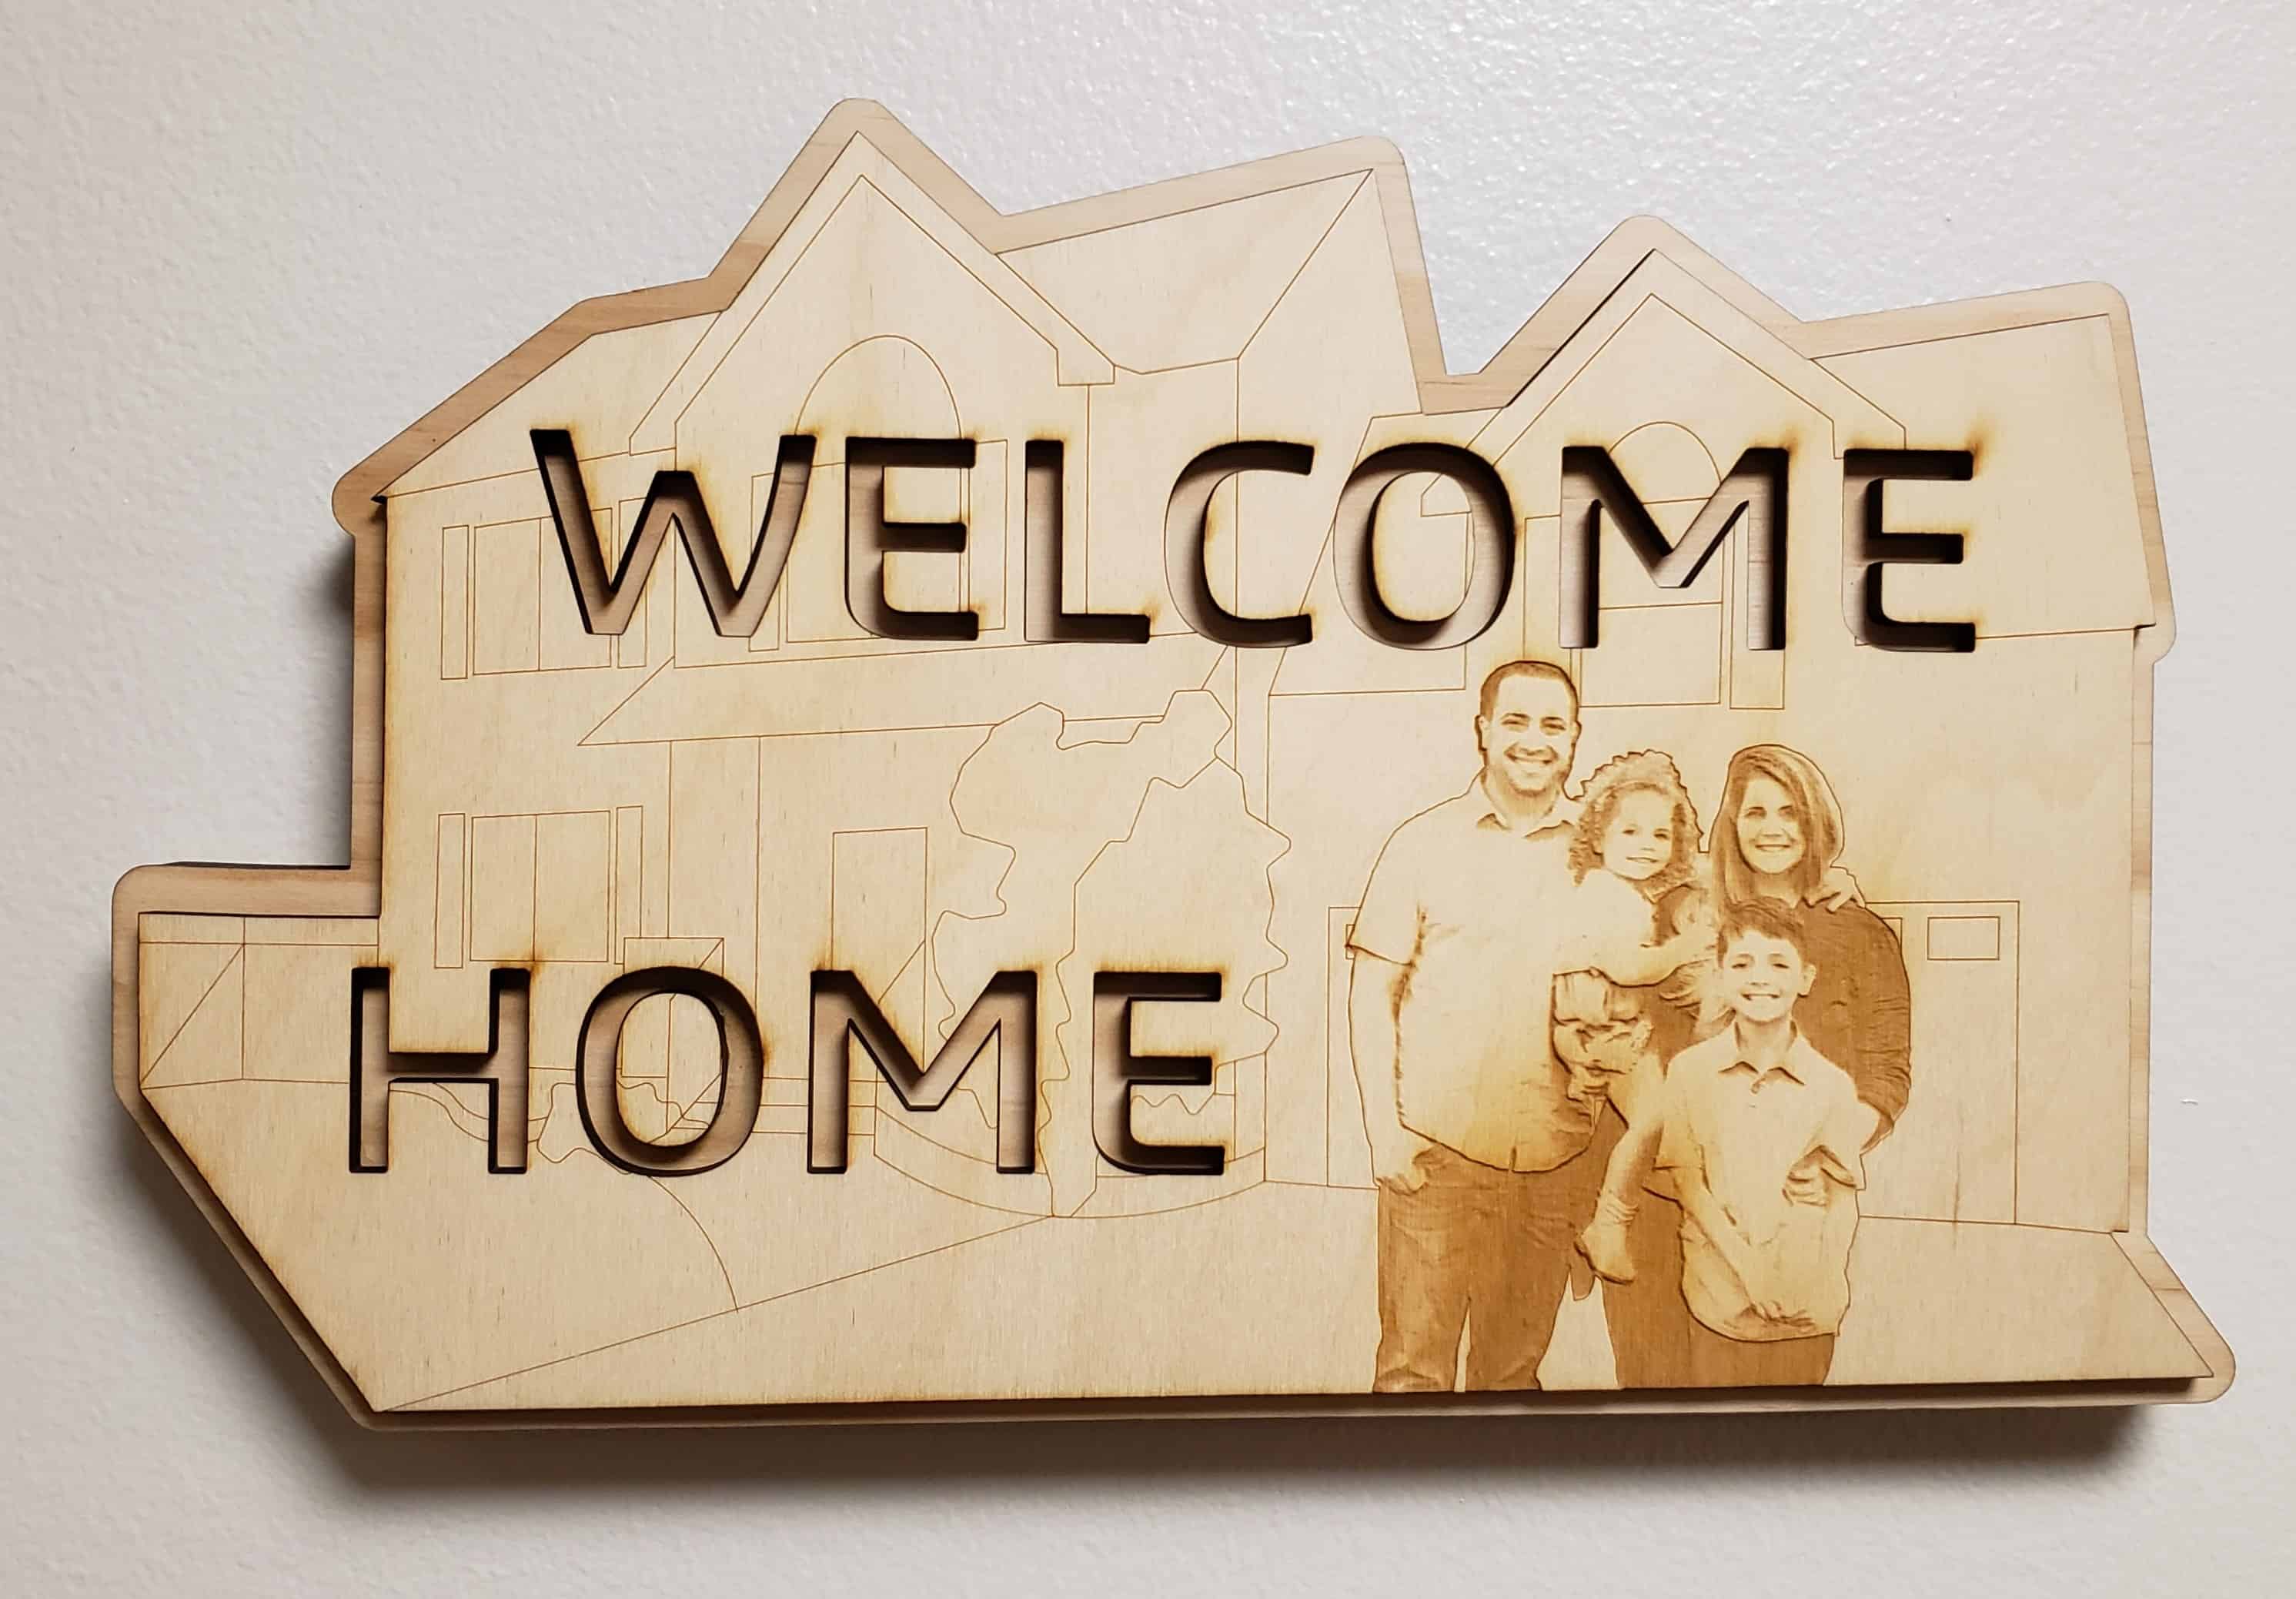 Welcome Home Plaque on Wall